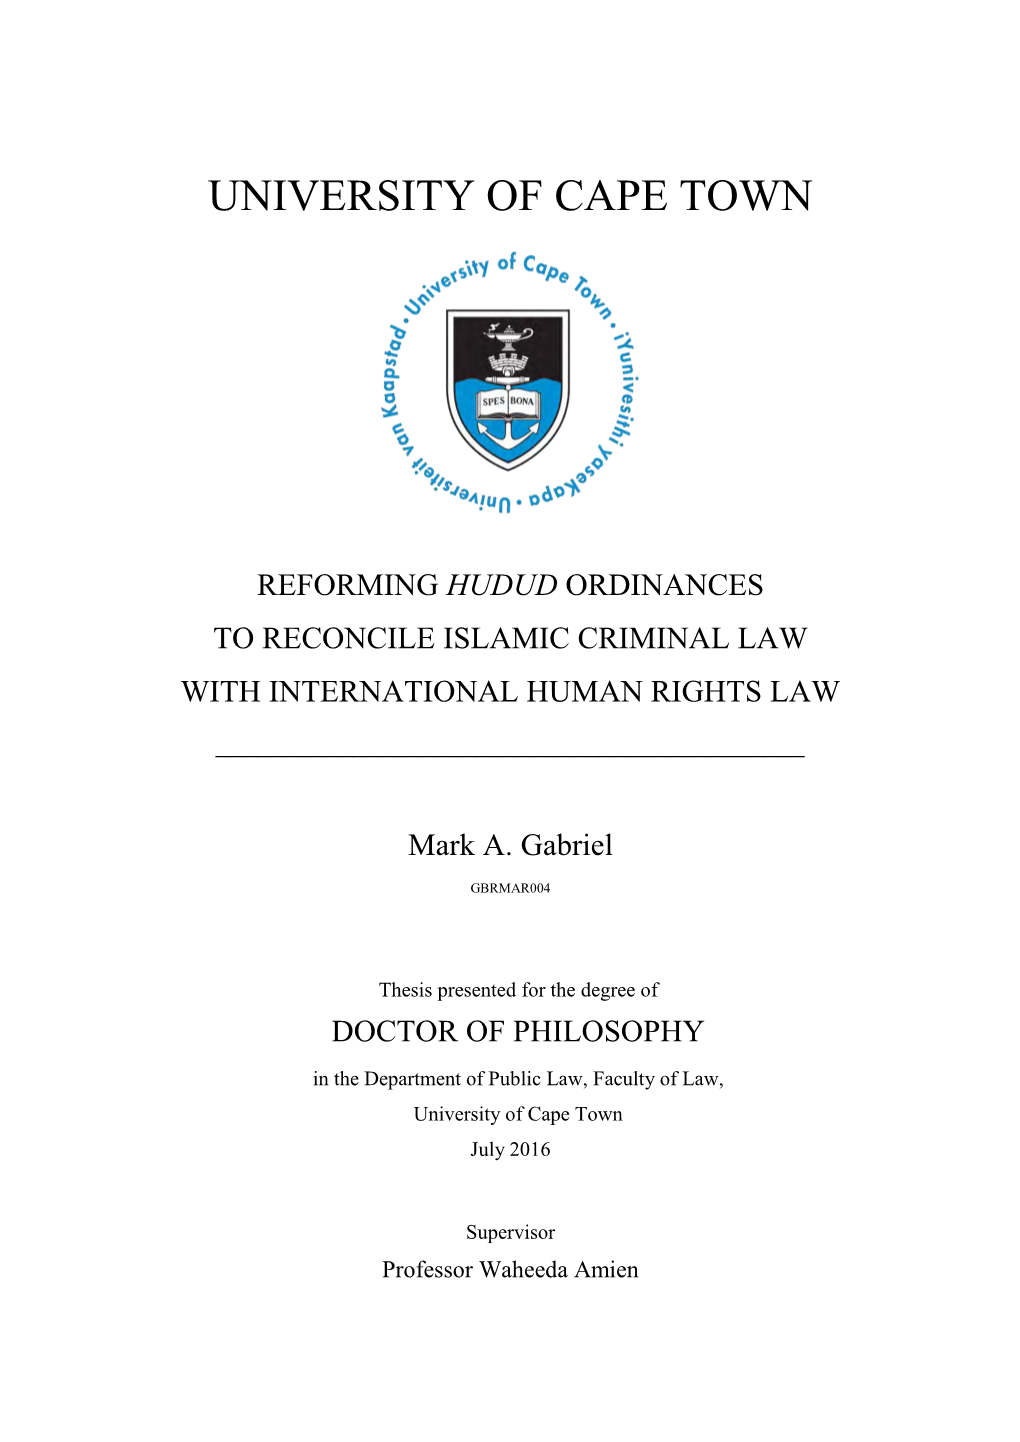 Reforming Hudud Ordinances to Reconcile Islamic Criminal Law with International Human Rights Law ______